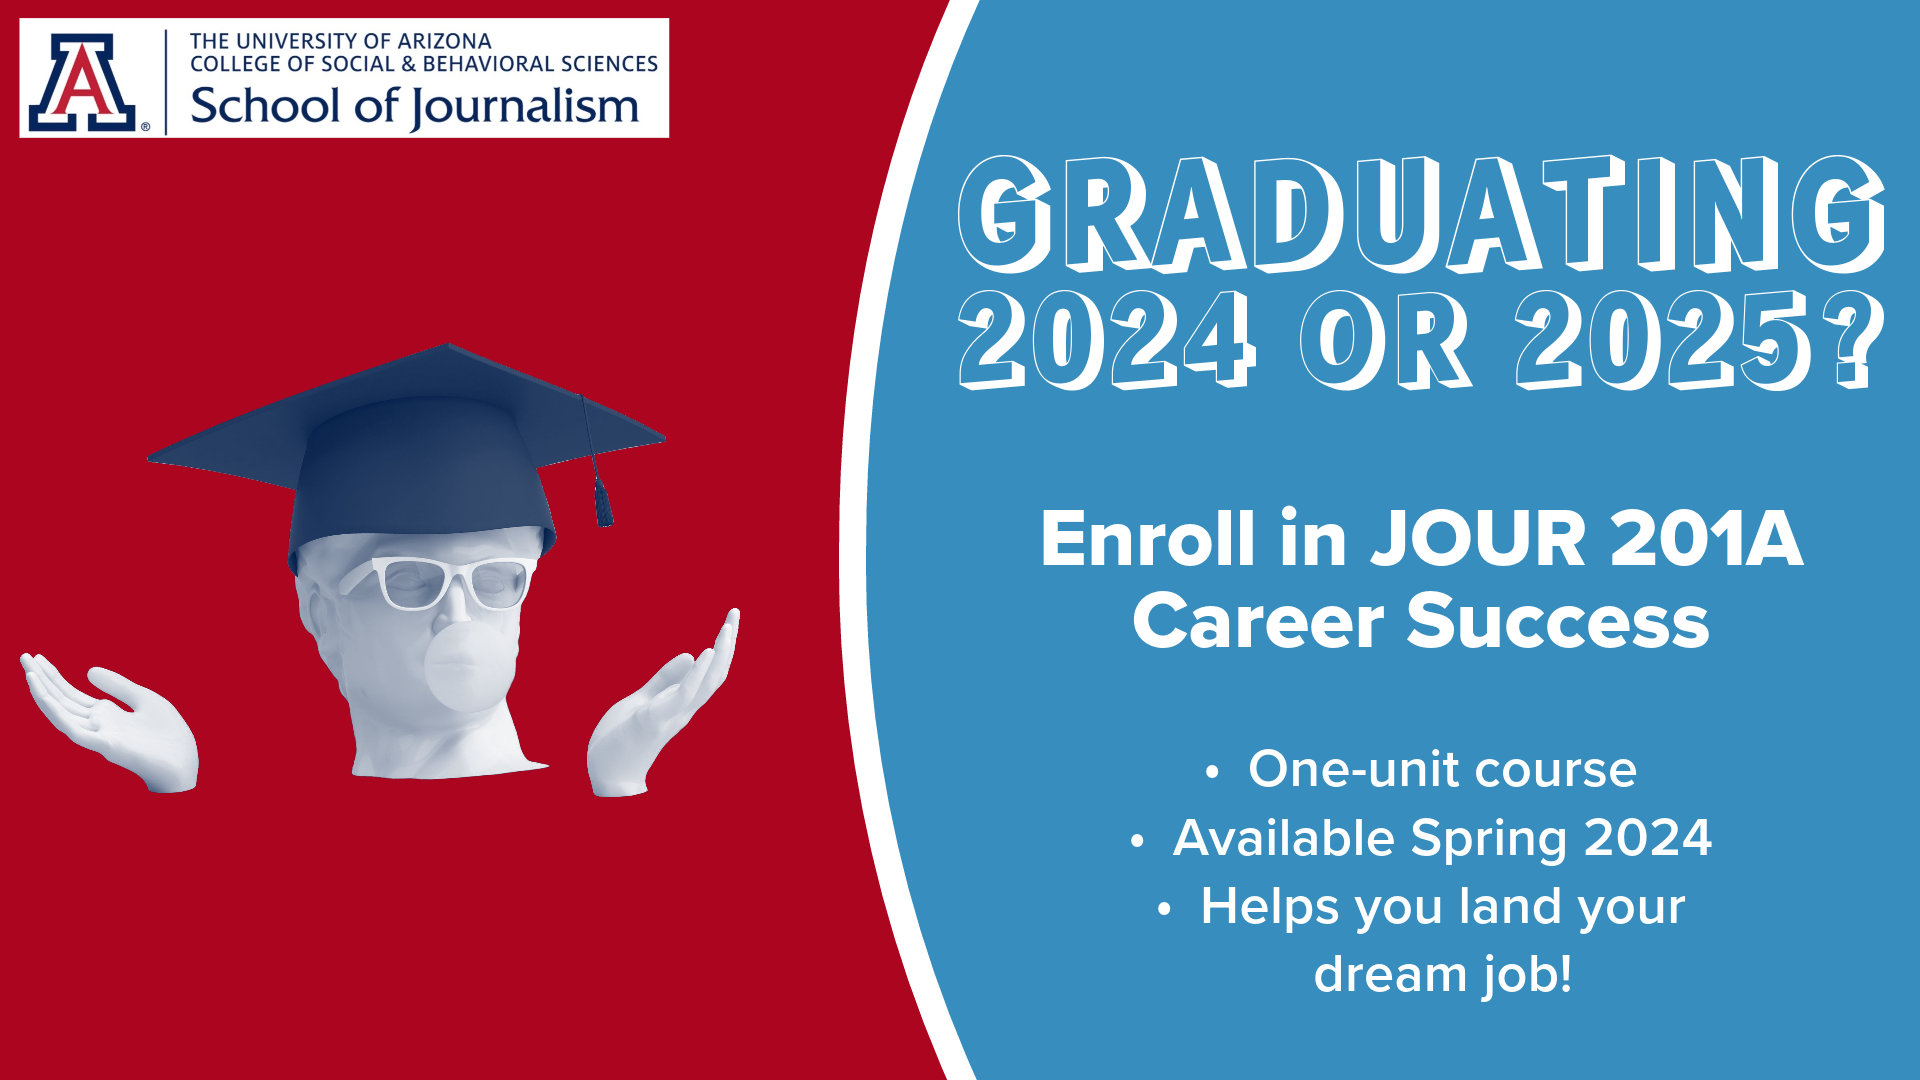 Enrollment for JOUR 201A is open for spring 